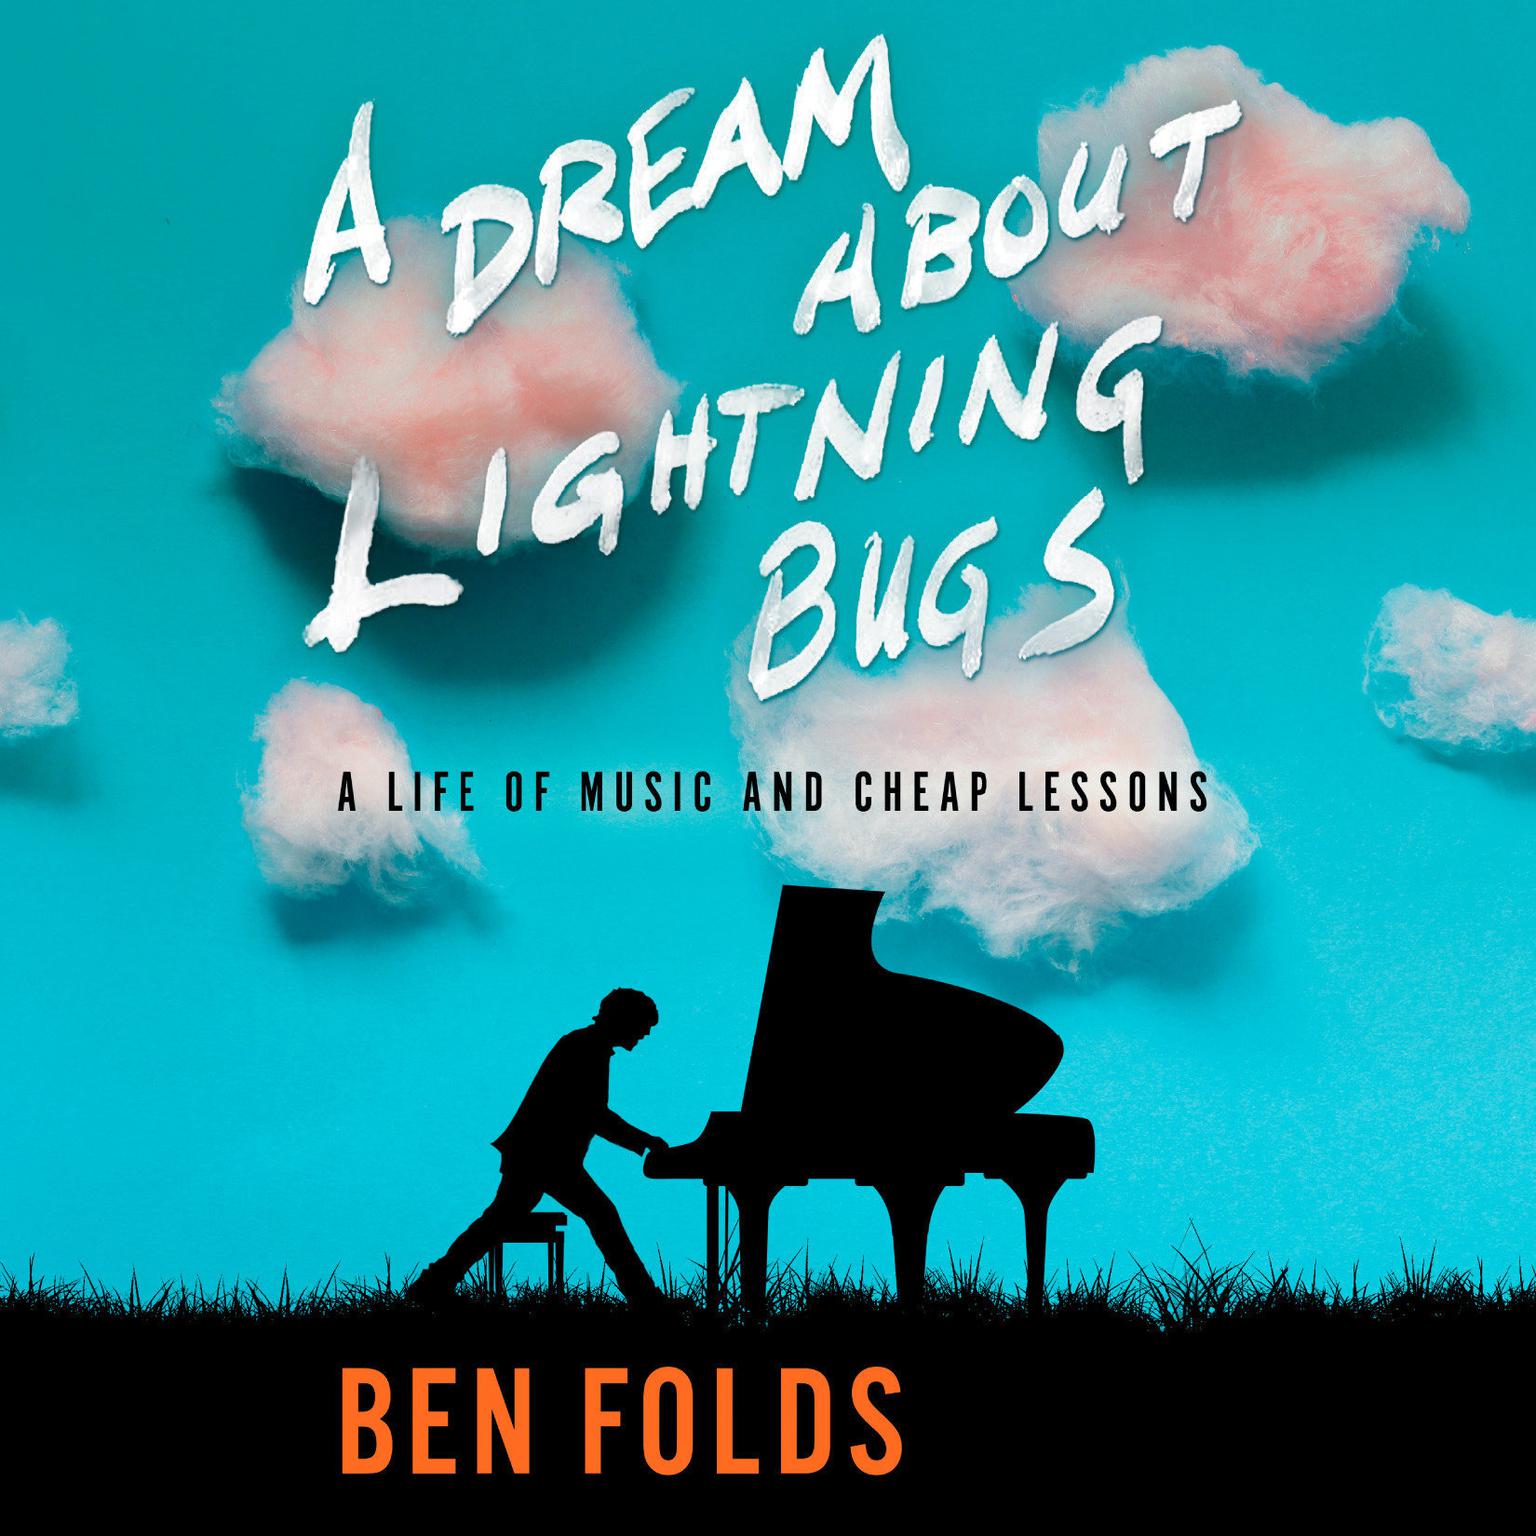 A Dream About Lightning Bugs: A Life of Music and Cheap Lessons Audiobook, by Ben Folds